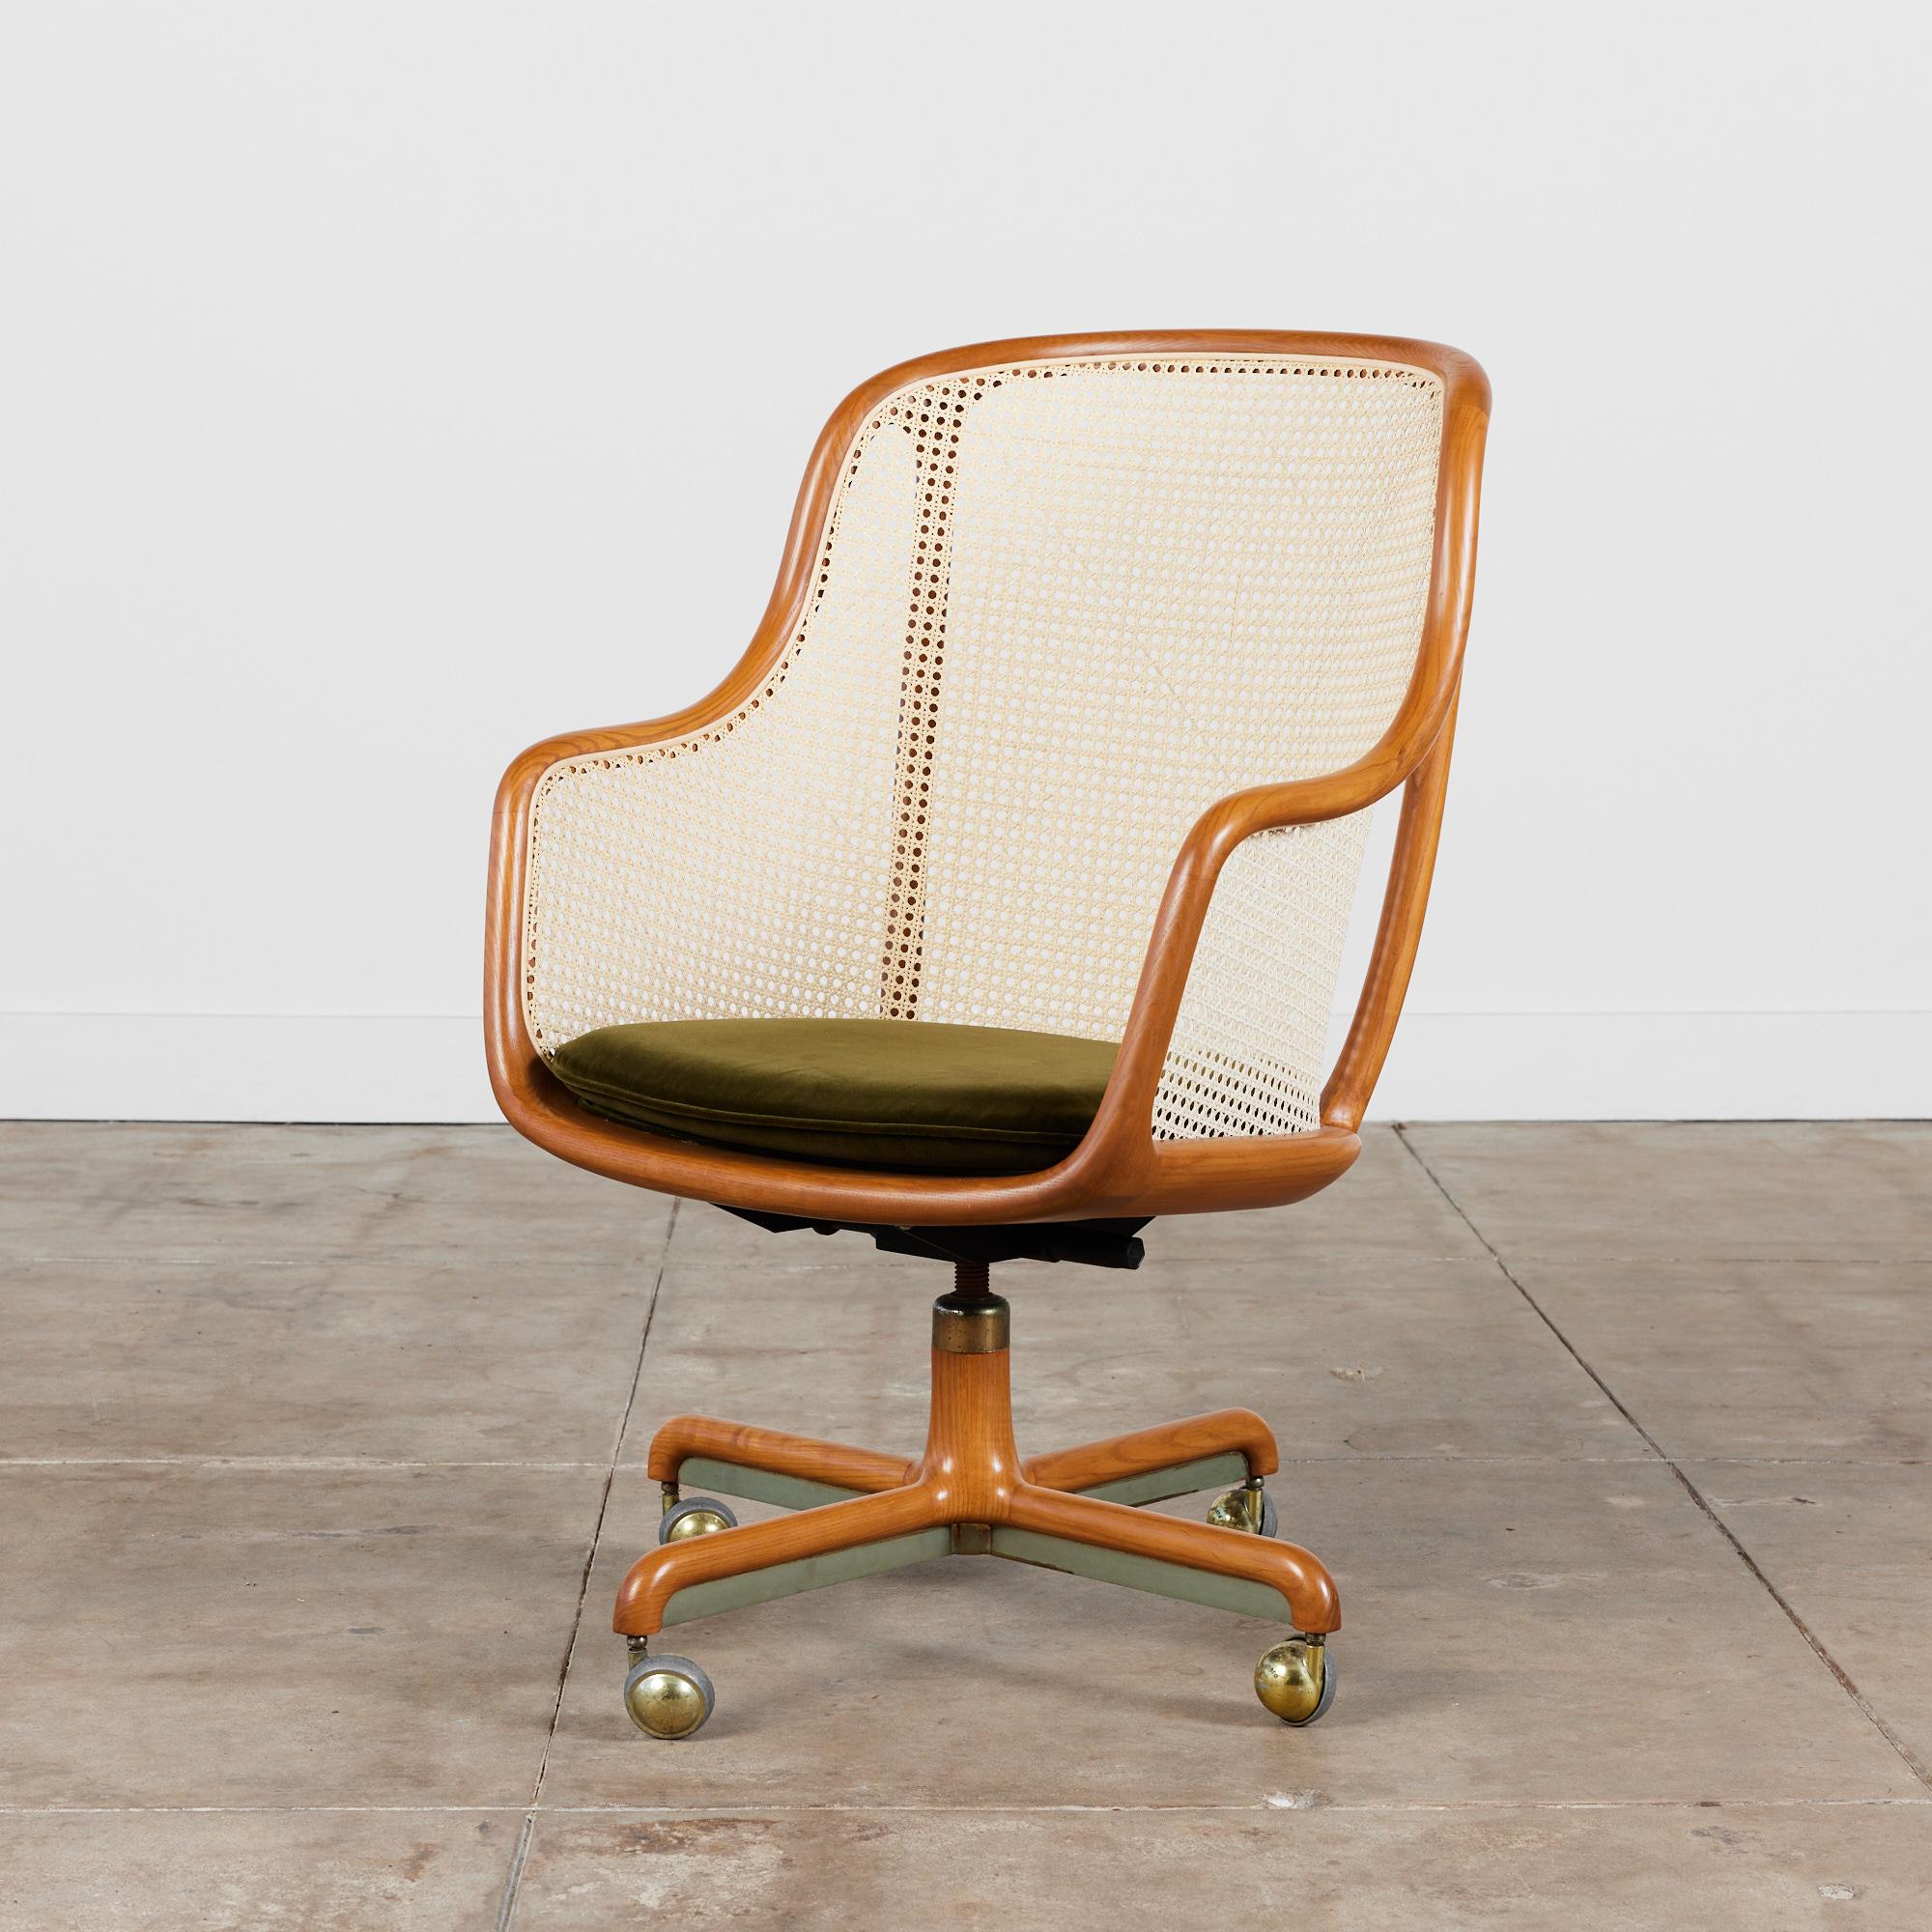 Ward Bennett Cane Desk Chair for Brickel Associates, circa 1960s, USA. This chair features an oak fame with cane back and armrests. The seat cushion has been newly upholstered in olive green velvet. The chair has both a tilt and swivel mechanism and